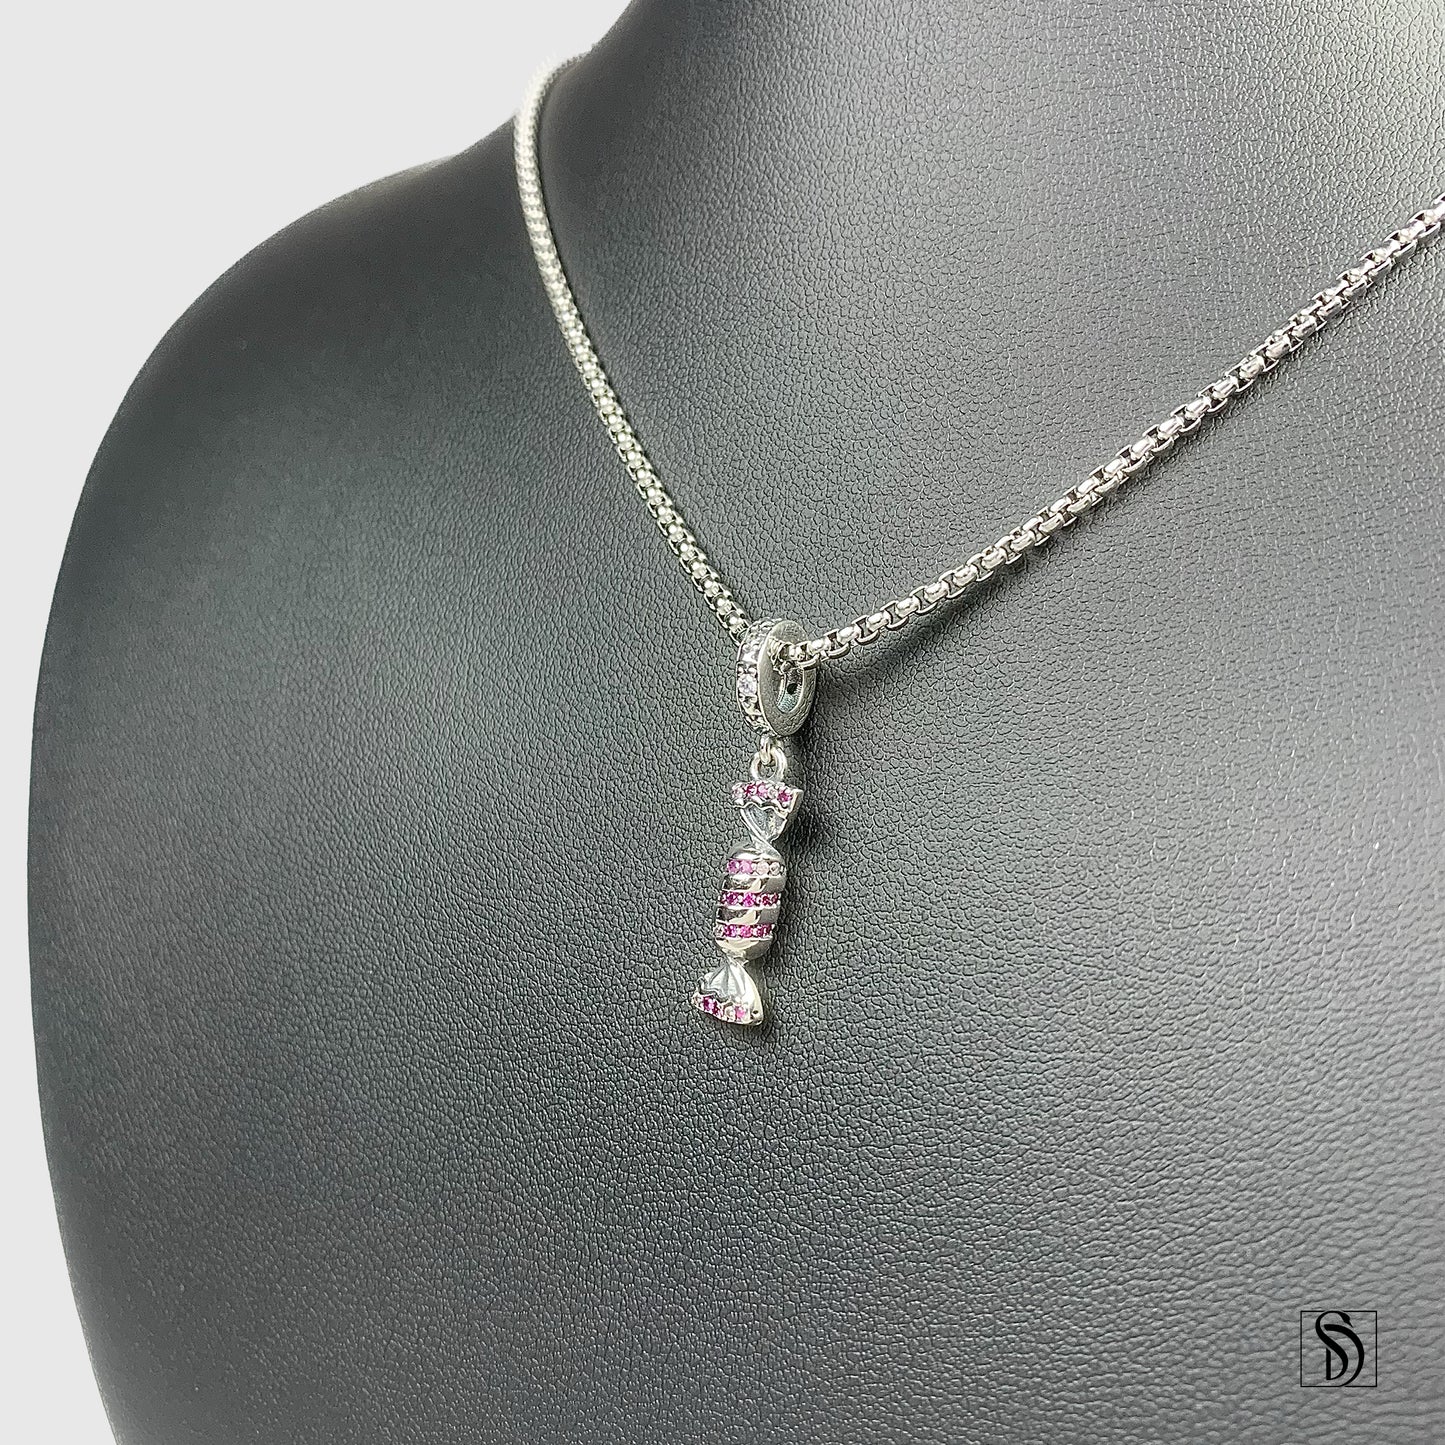 Silver Candy Gemstones Pendant Necklace